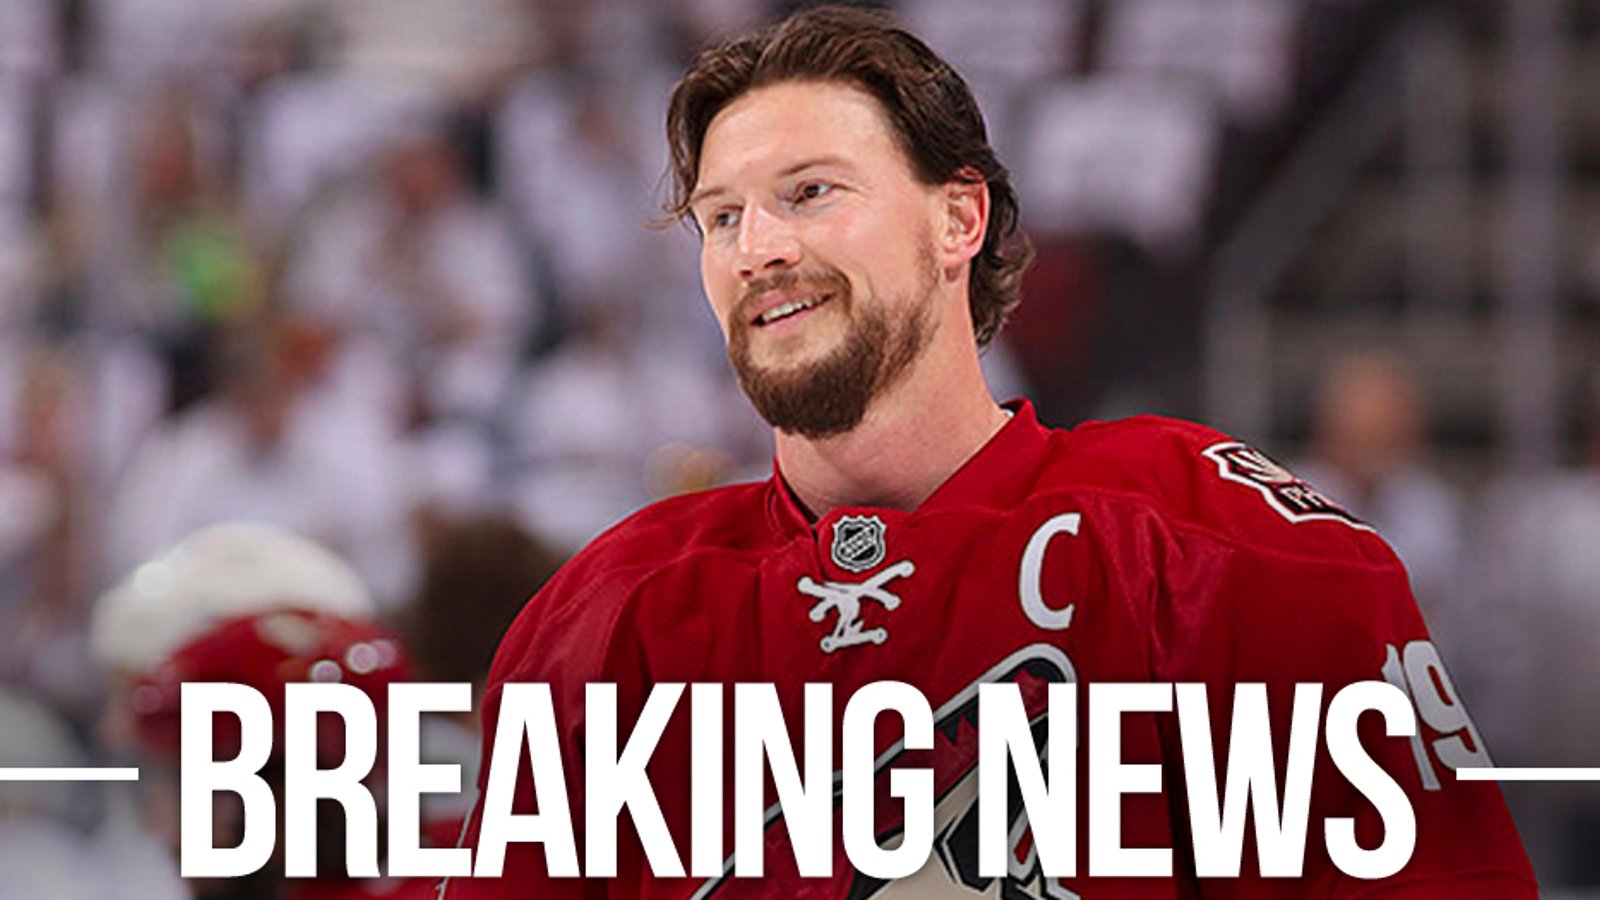 Shane Doan makes a bit of a comeback, joins Coyotes